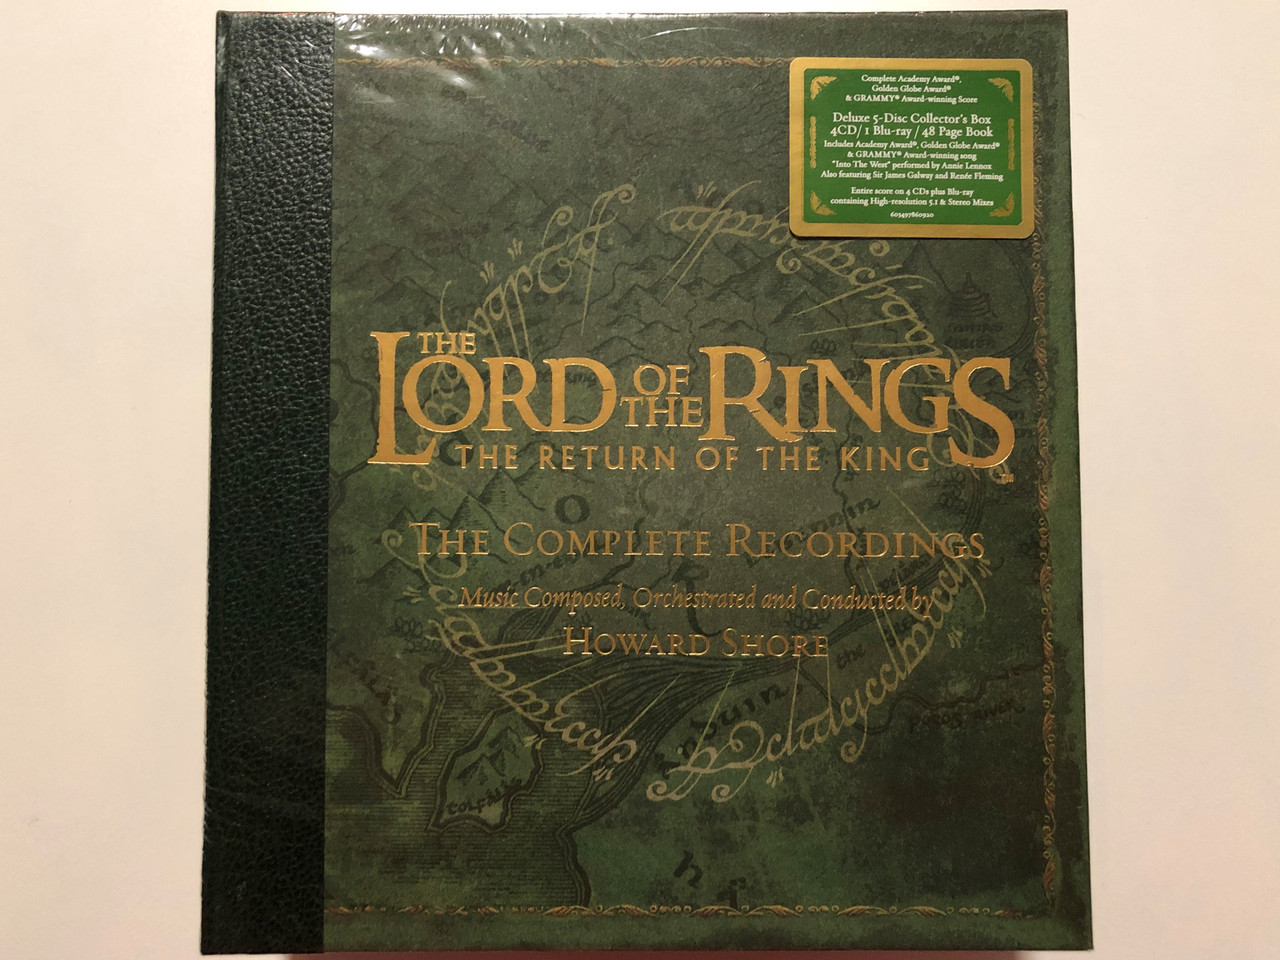 The Lord Of The Rings The Return Of The King - The Complete Recordings /  Music Composed Orchestrated and Conducted by Howard Shore / Reprise Records  5x Audio CD 2018, Box Set / 162044-2 - bibleinmylanguage